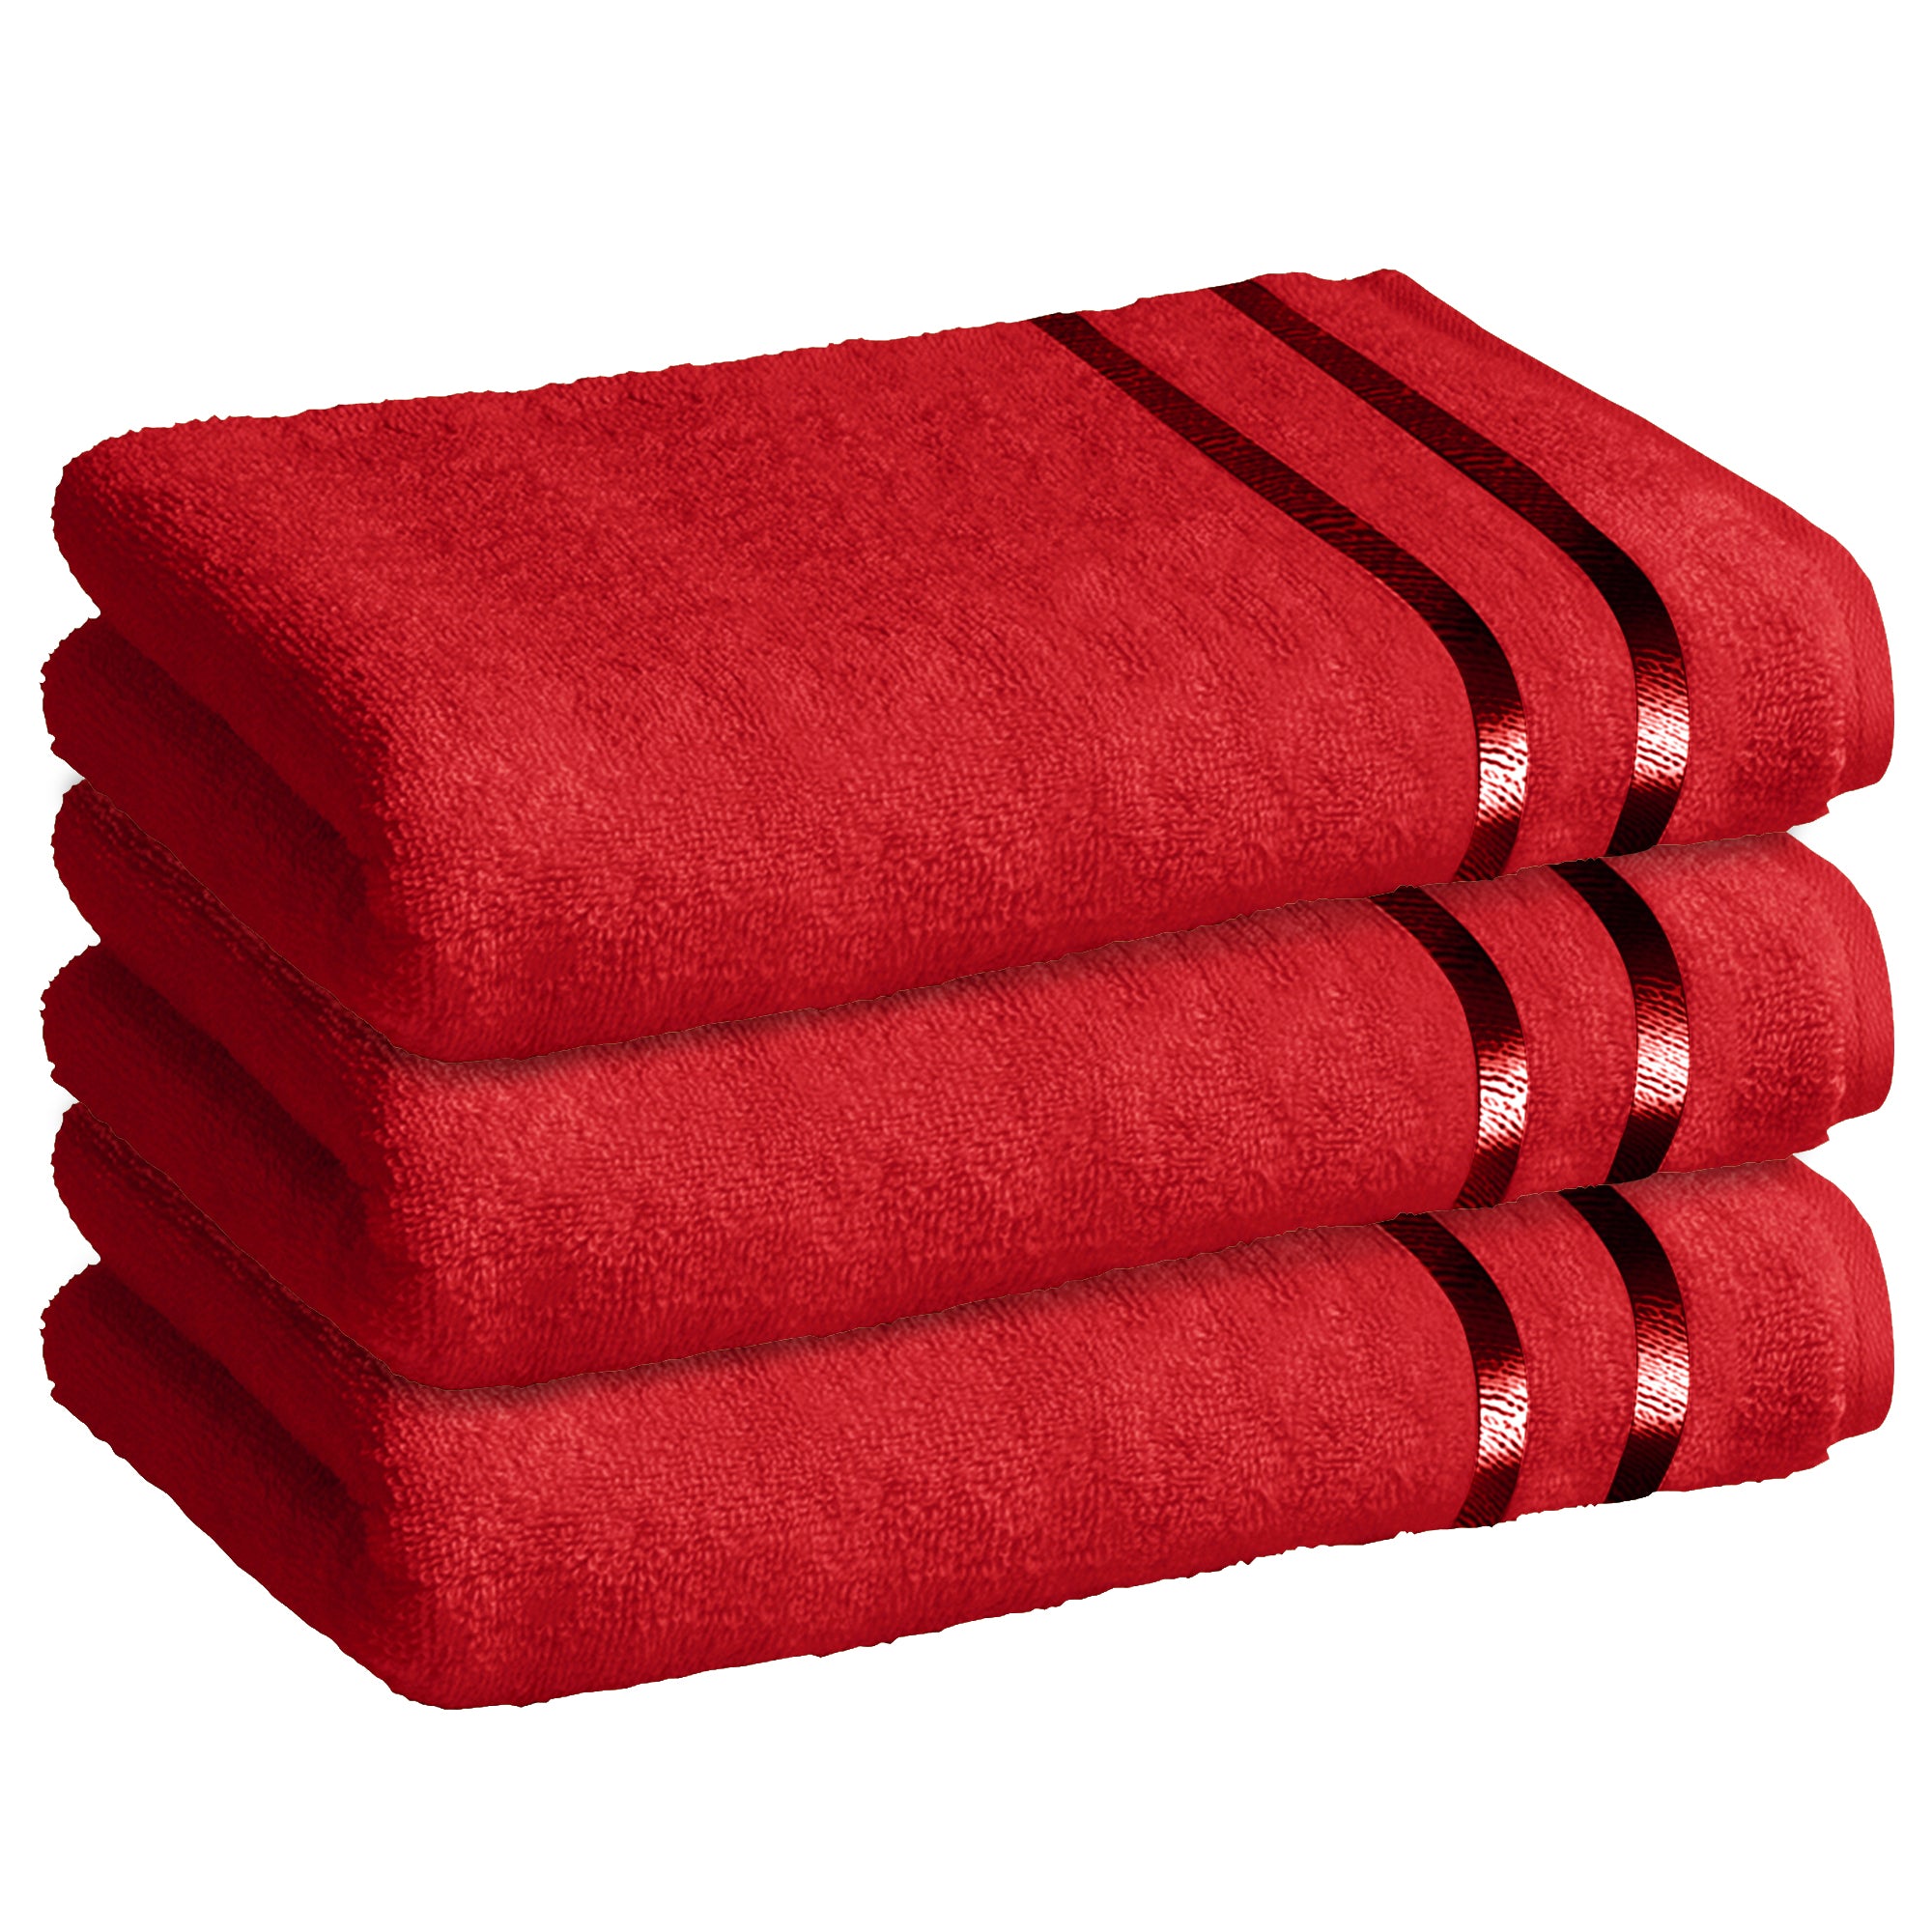 Story@Home 3 Units 100% Cotton Bath Towels - Wine Red